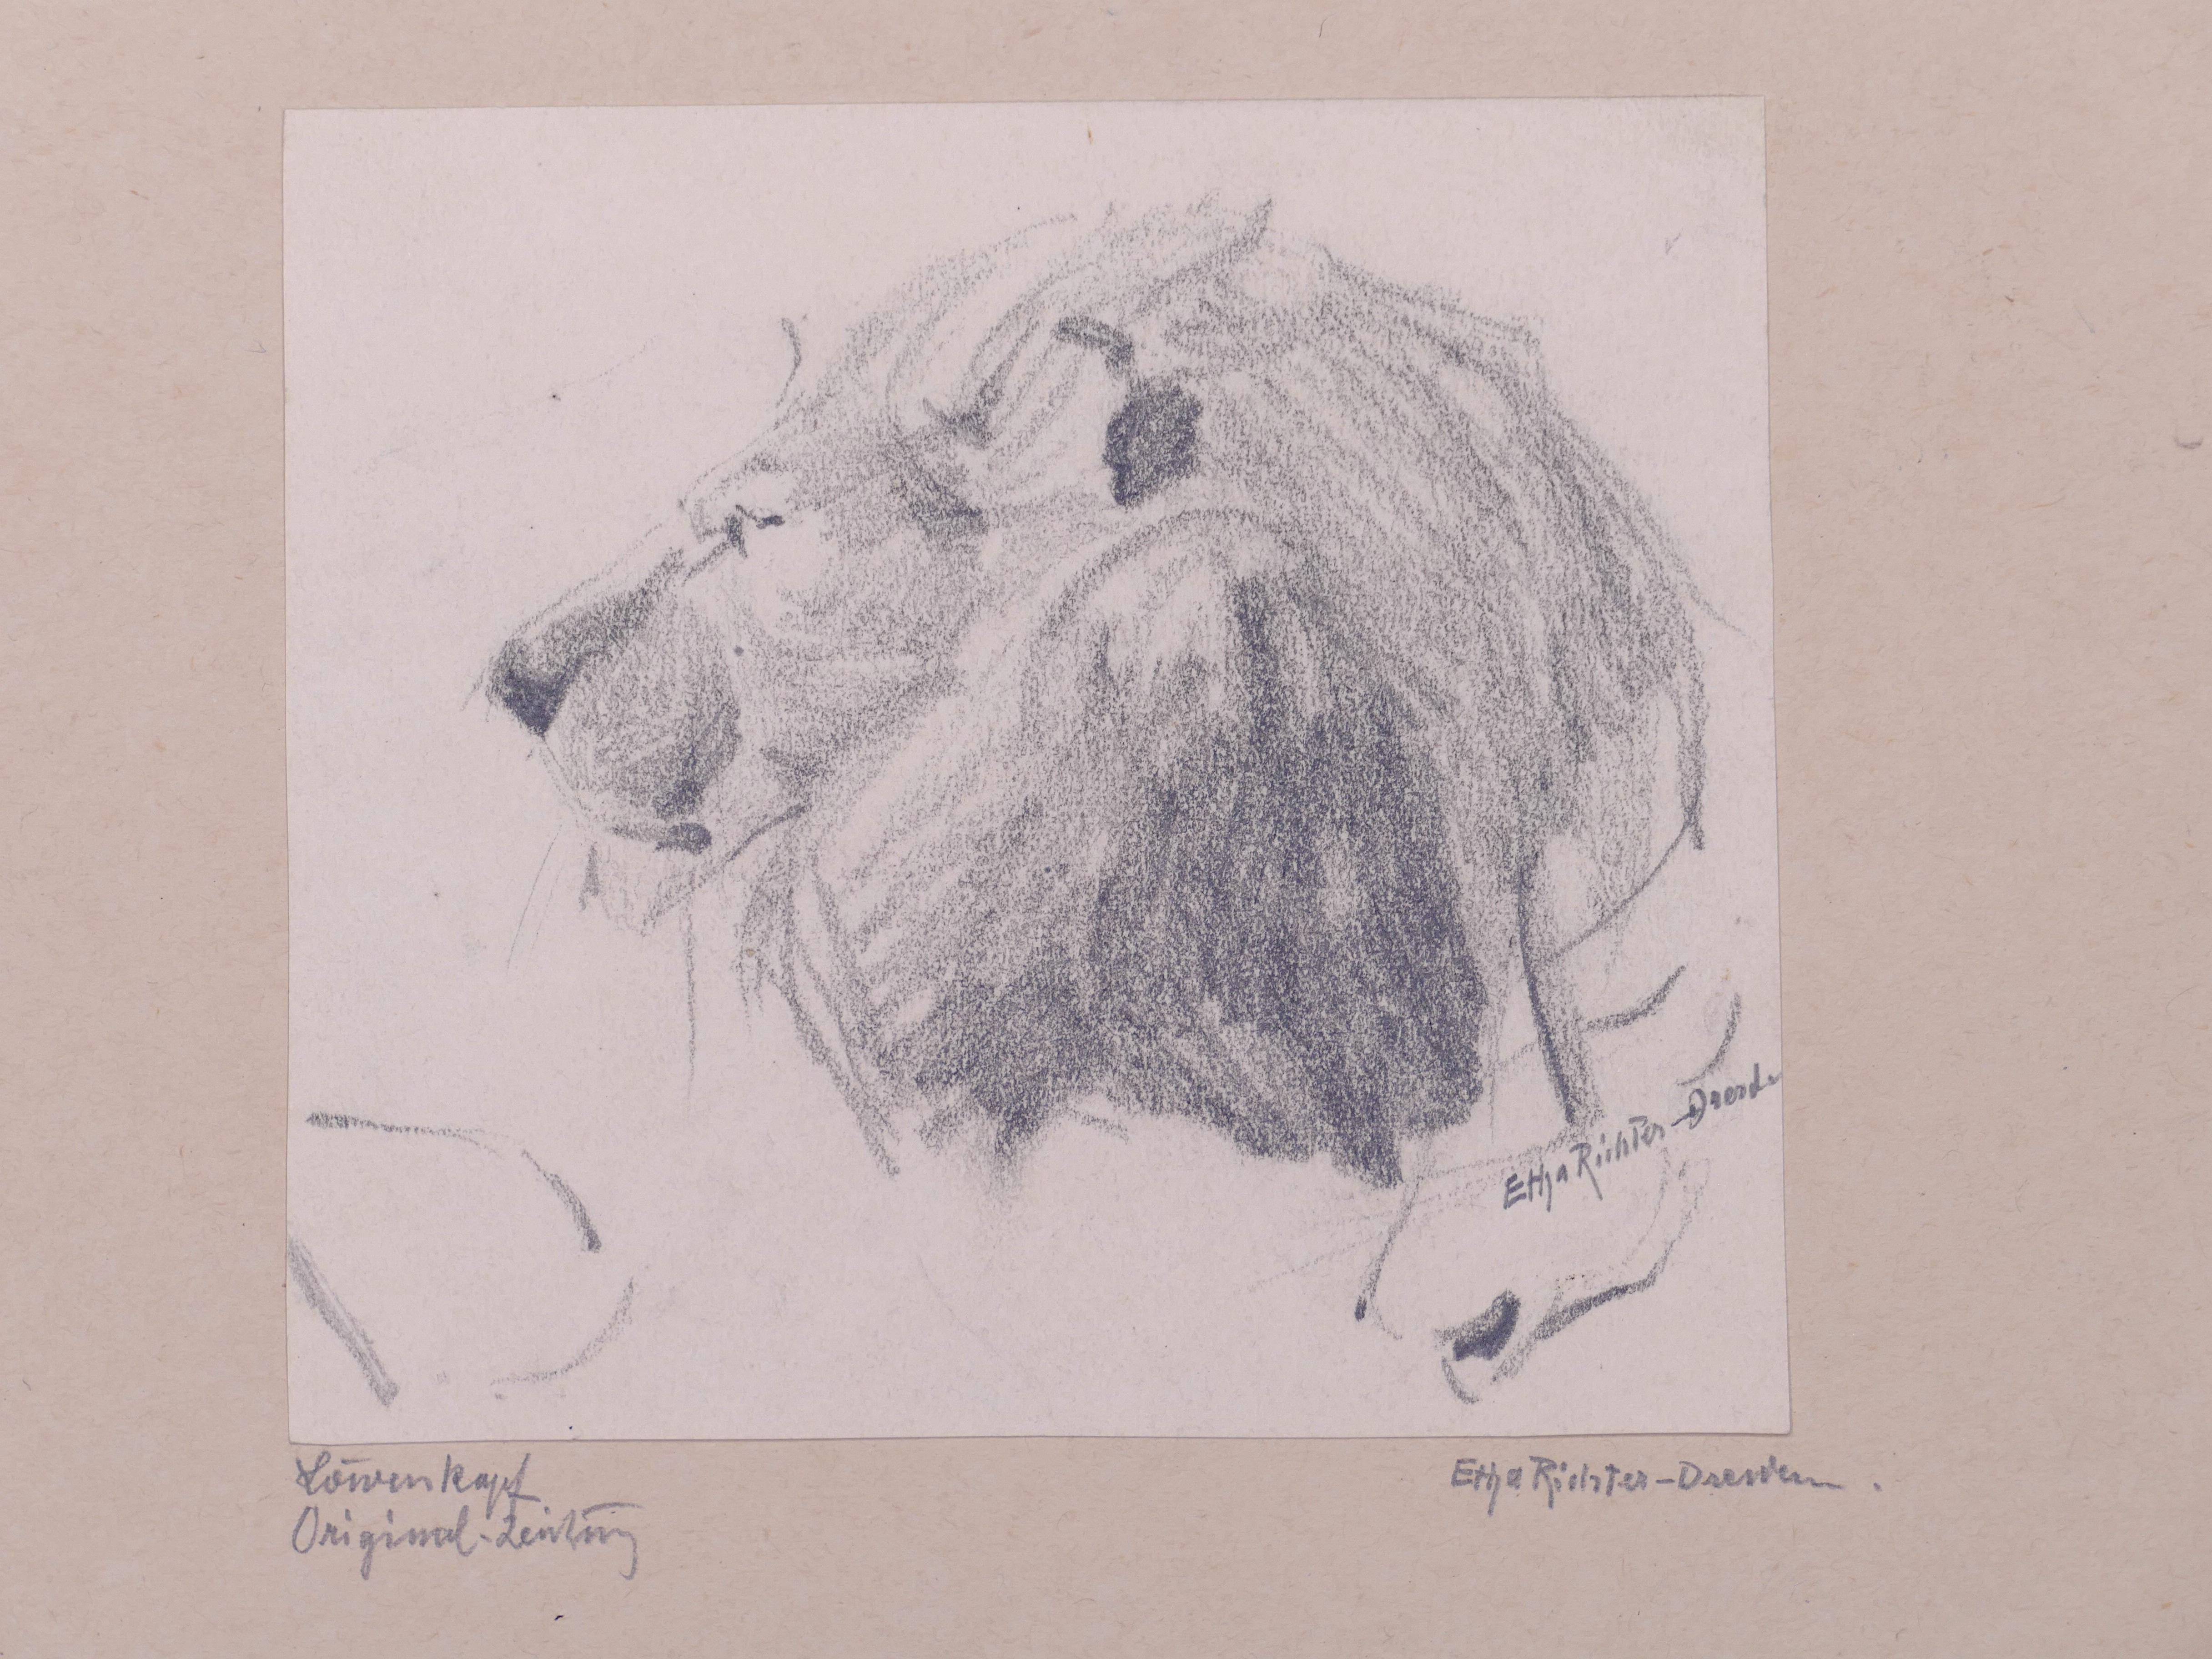 Lion is an original pencil drawing by the German artist Etha Richter (Dresda,1883 - Dresda,1977).

Hand-signed in lead on the lower right: Etha Richter - Dresden. 

On the paper in which the drawing is mounted, the artist signed again specifying it